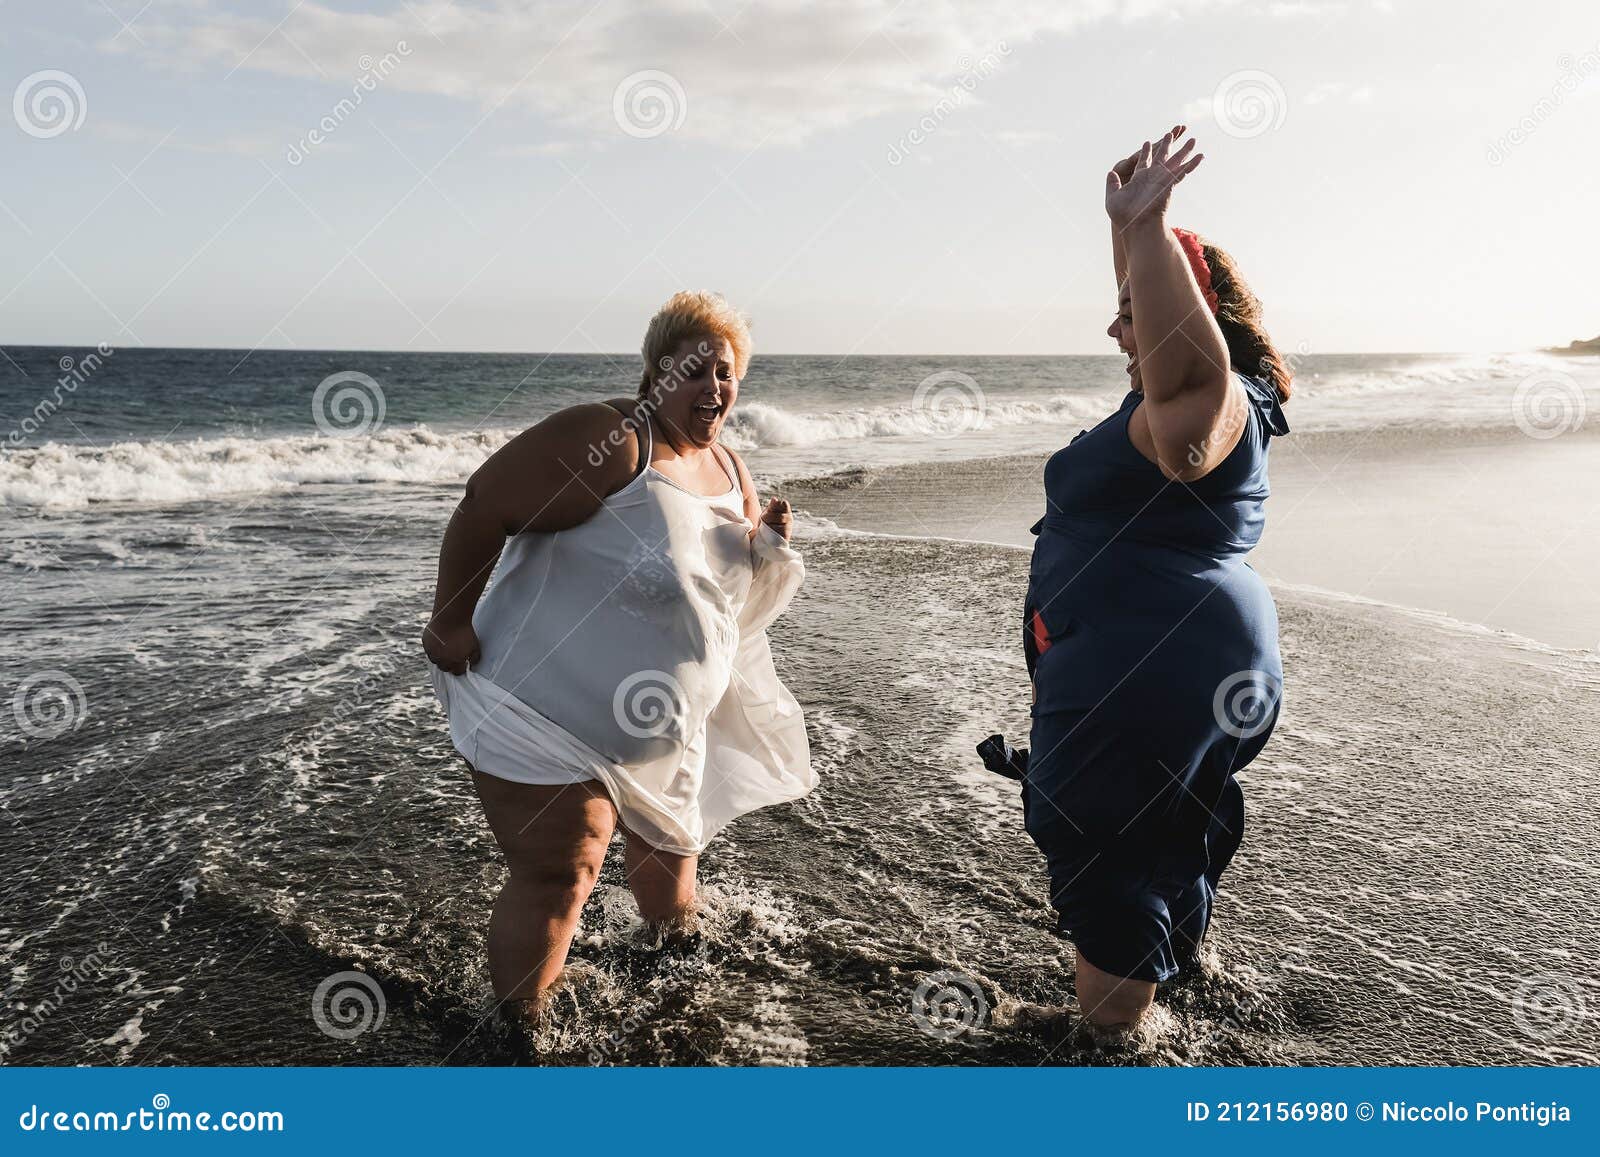 Curvy Women Dancing On The Beach Having Fun During Summer Vacation Focus On Left Woman Stock